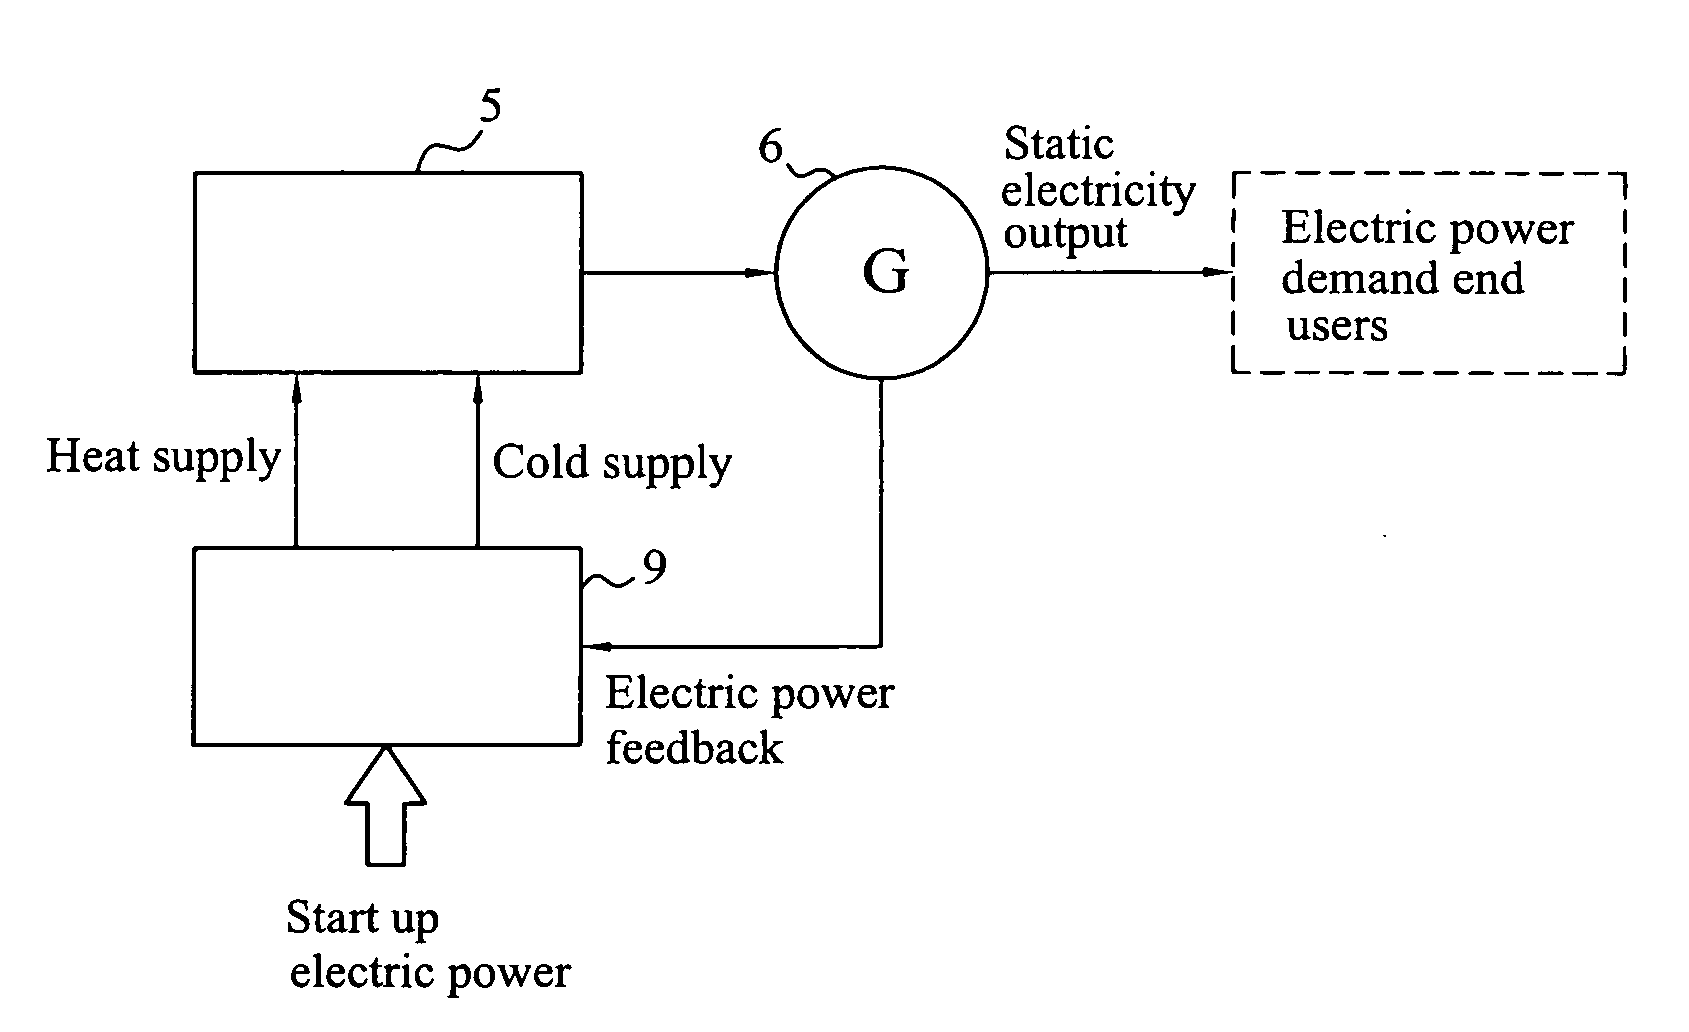 Power generation system driven by heat pump